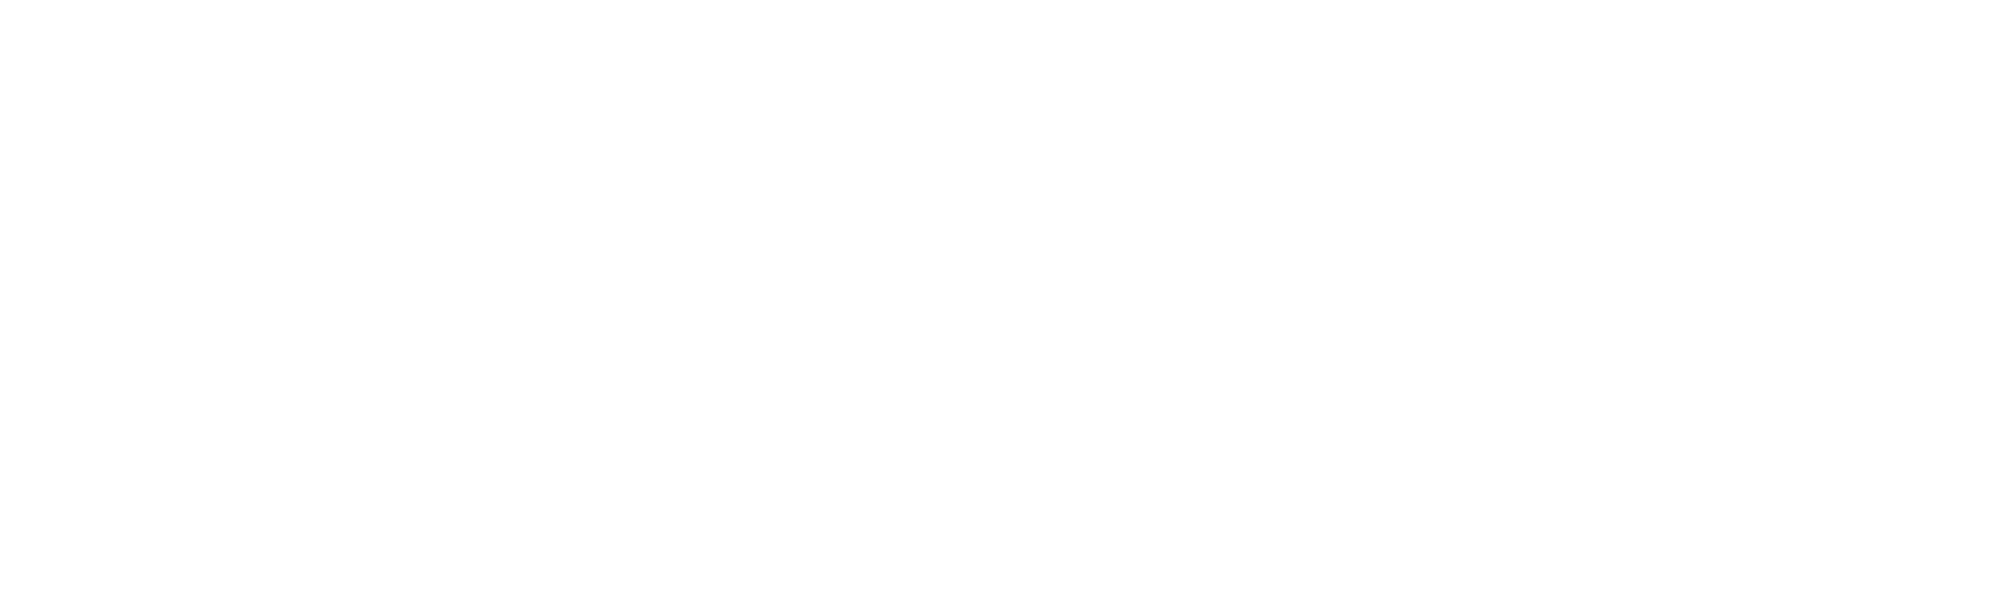 Now organ donation is on the tax form.